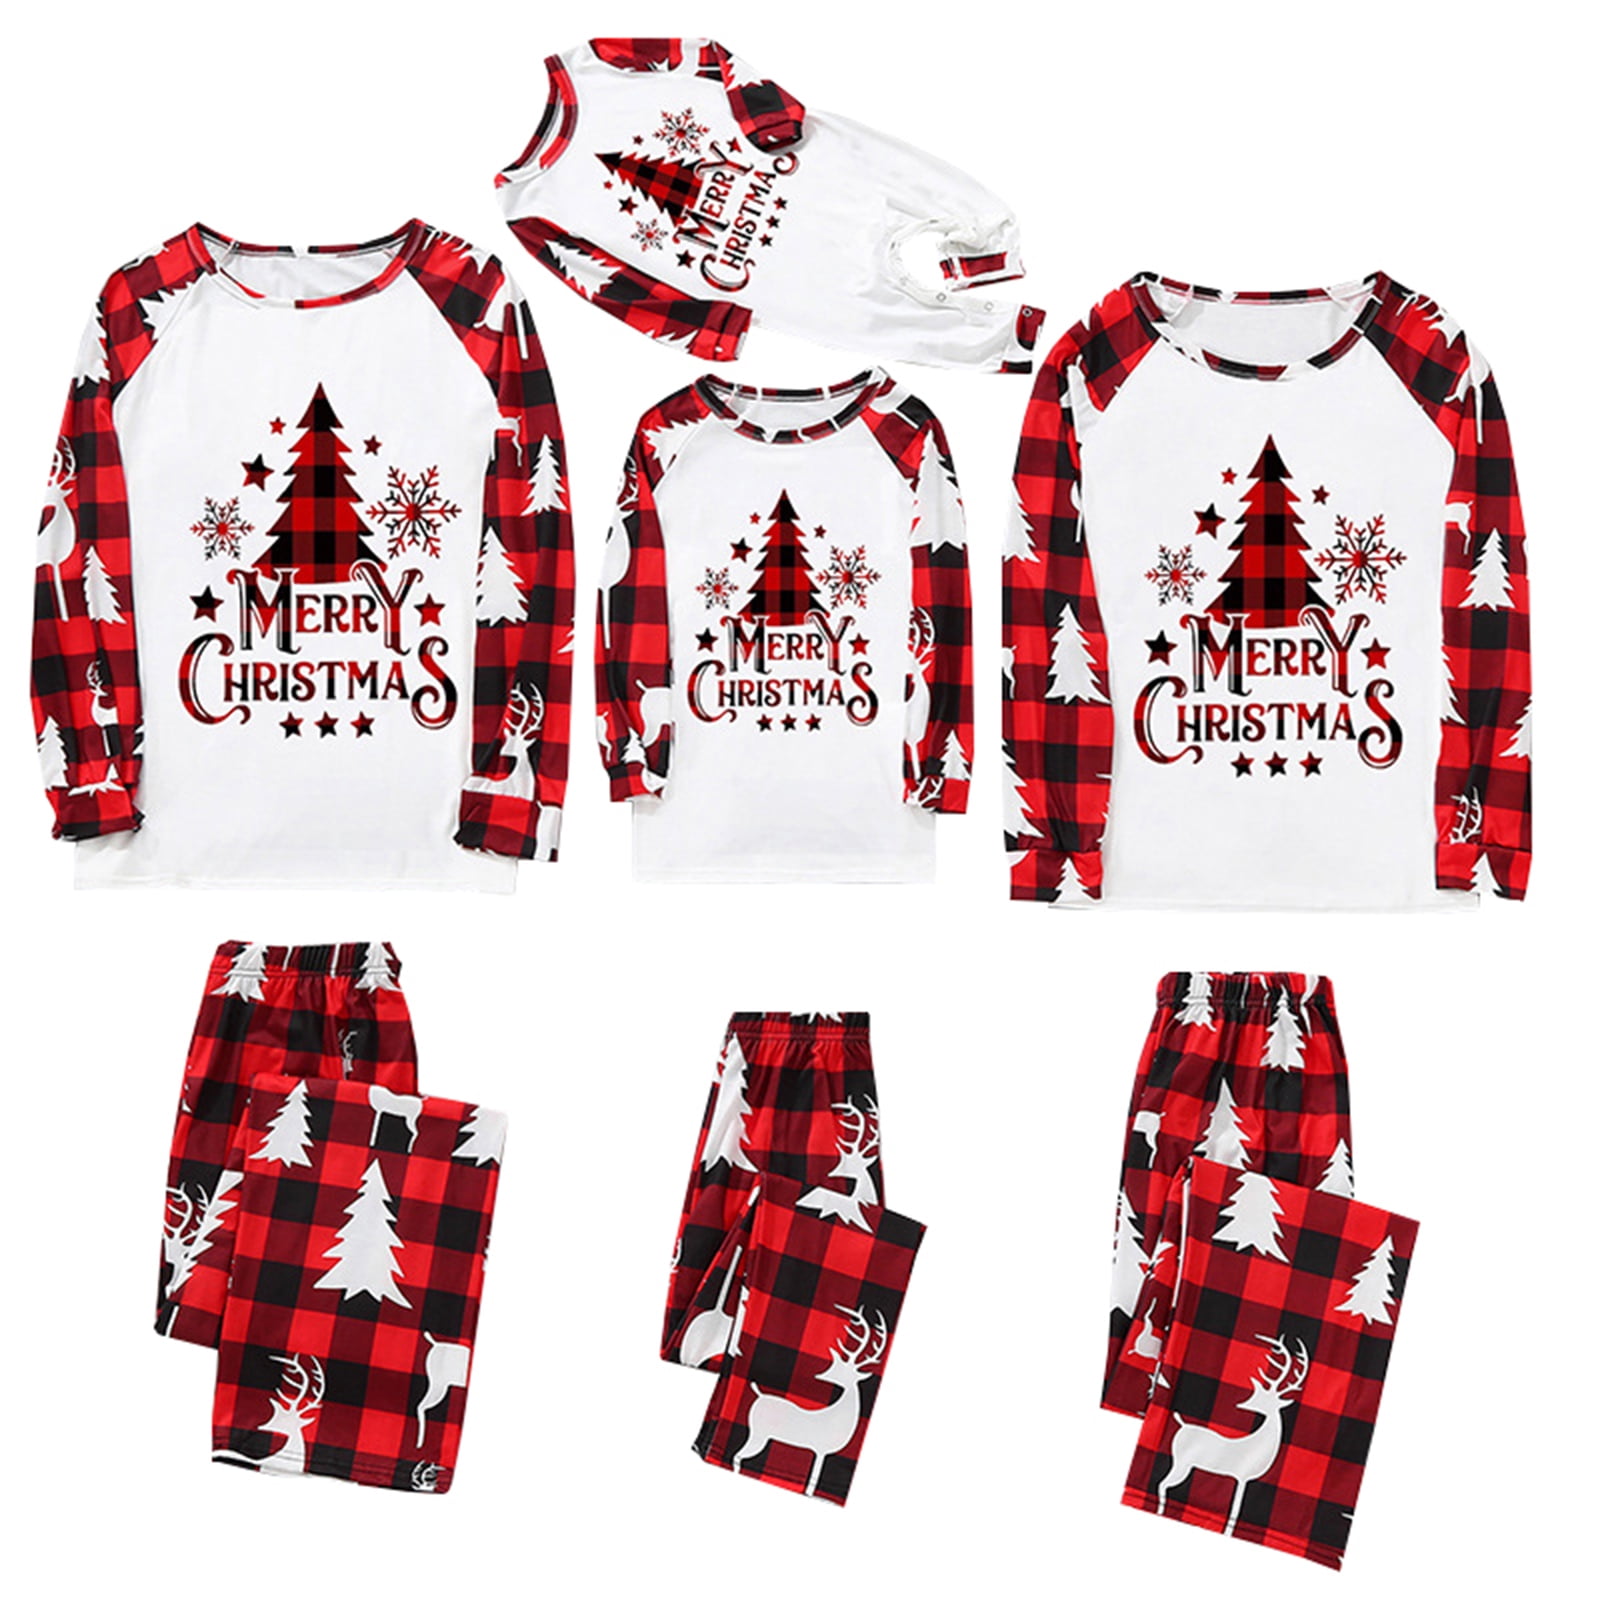 Nituyy Matching Christmas Pajamas Set for Family, Printed Pjs for Women ...